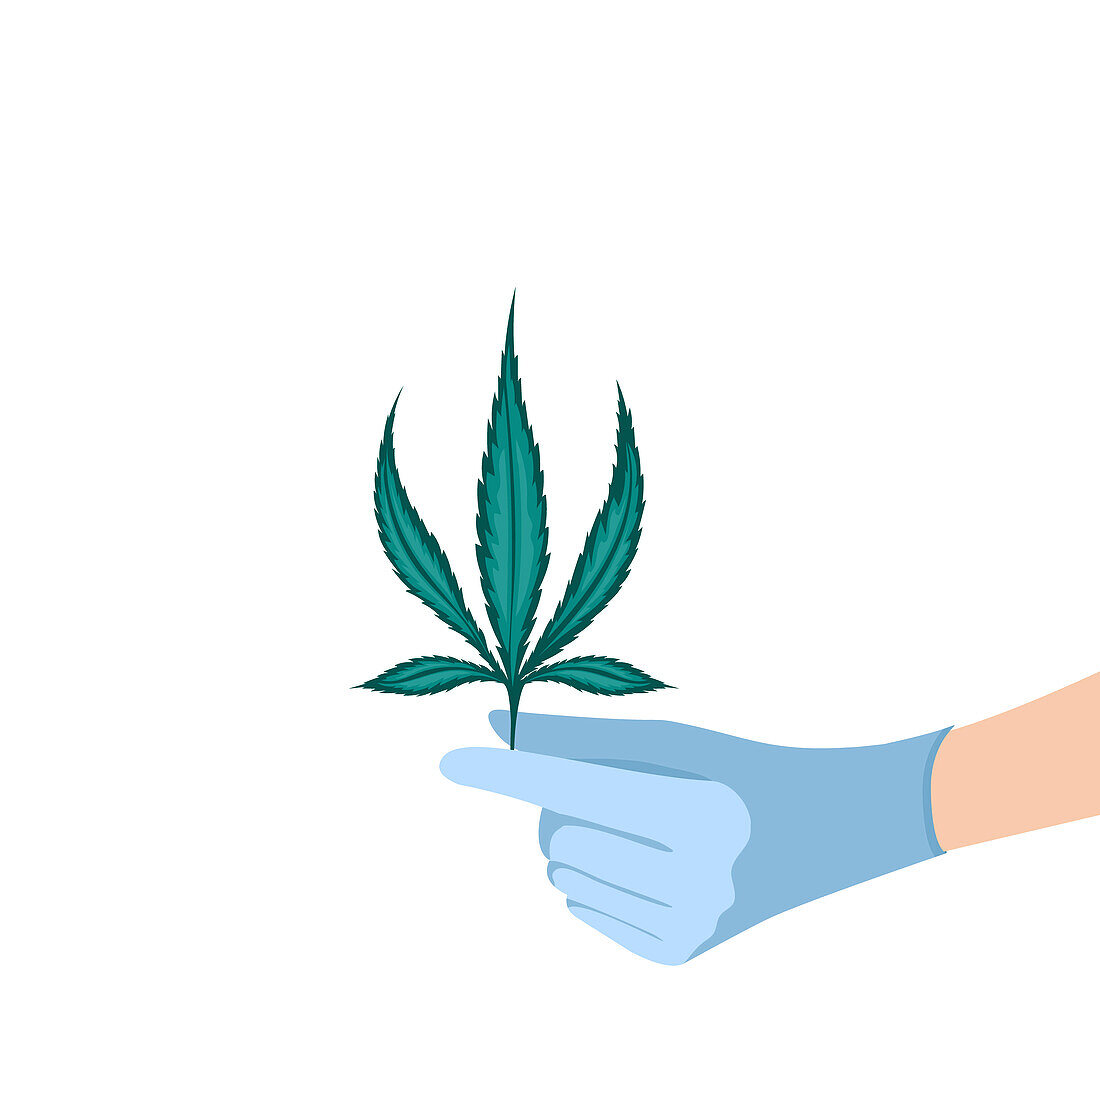 Treatment with cannabis plant, conceptual illustration